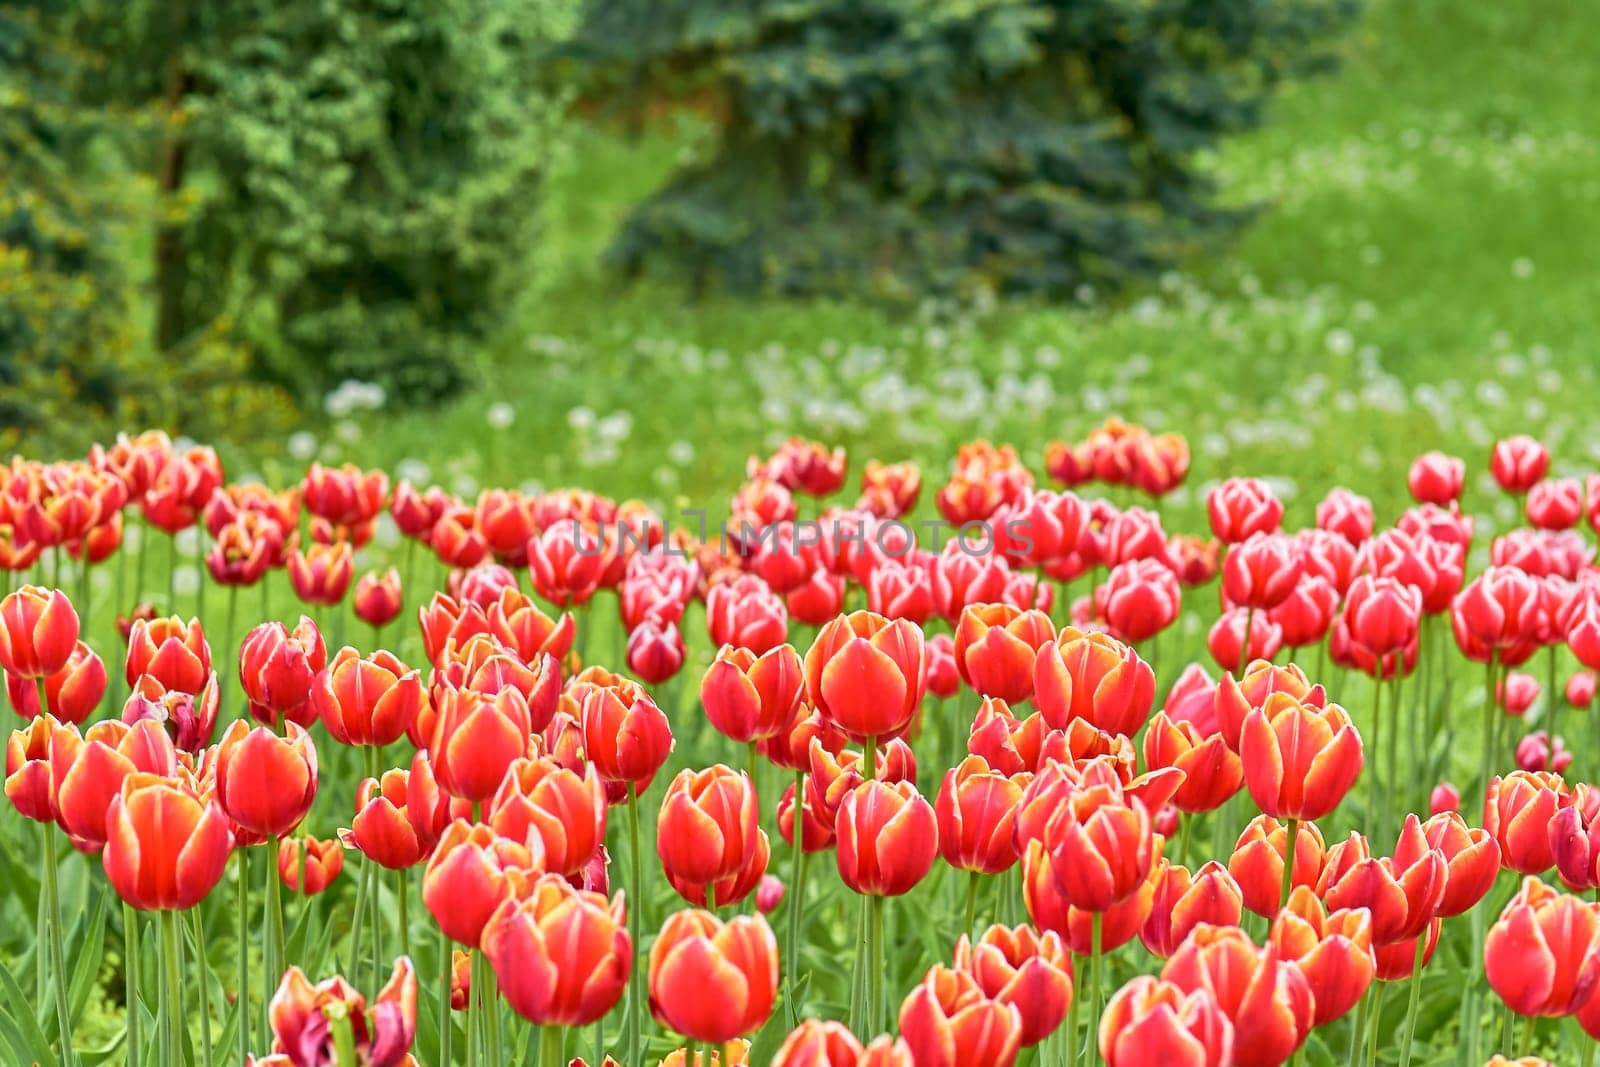 Cute carpet picture of red tulips in the park, plantation by jovani68